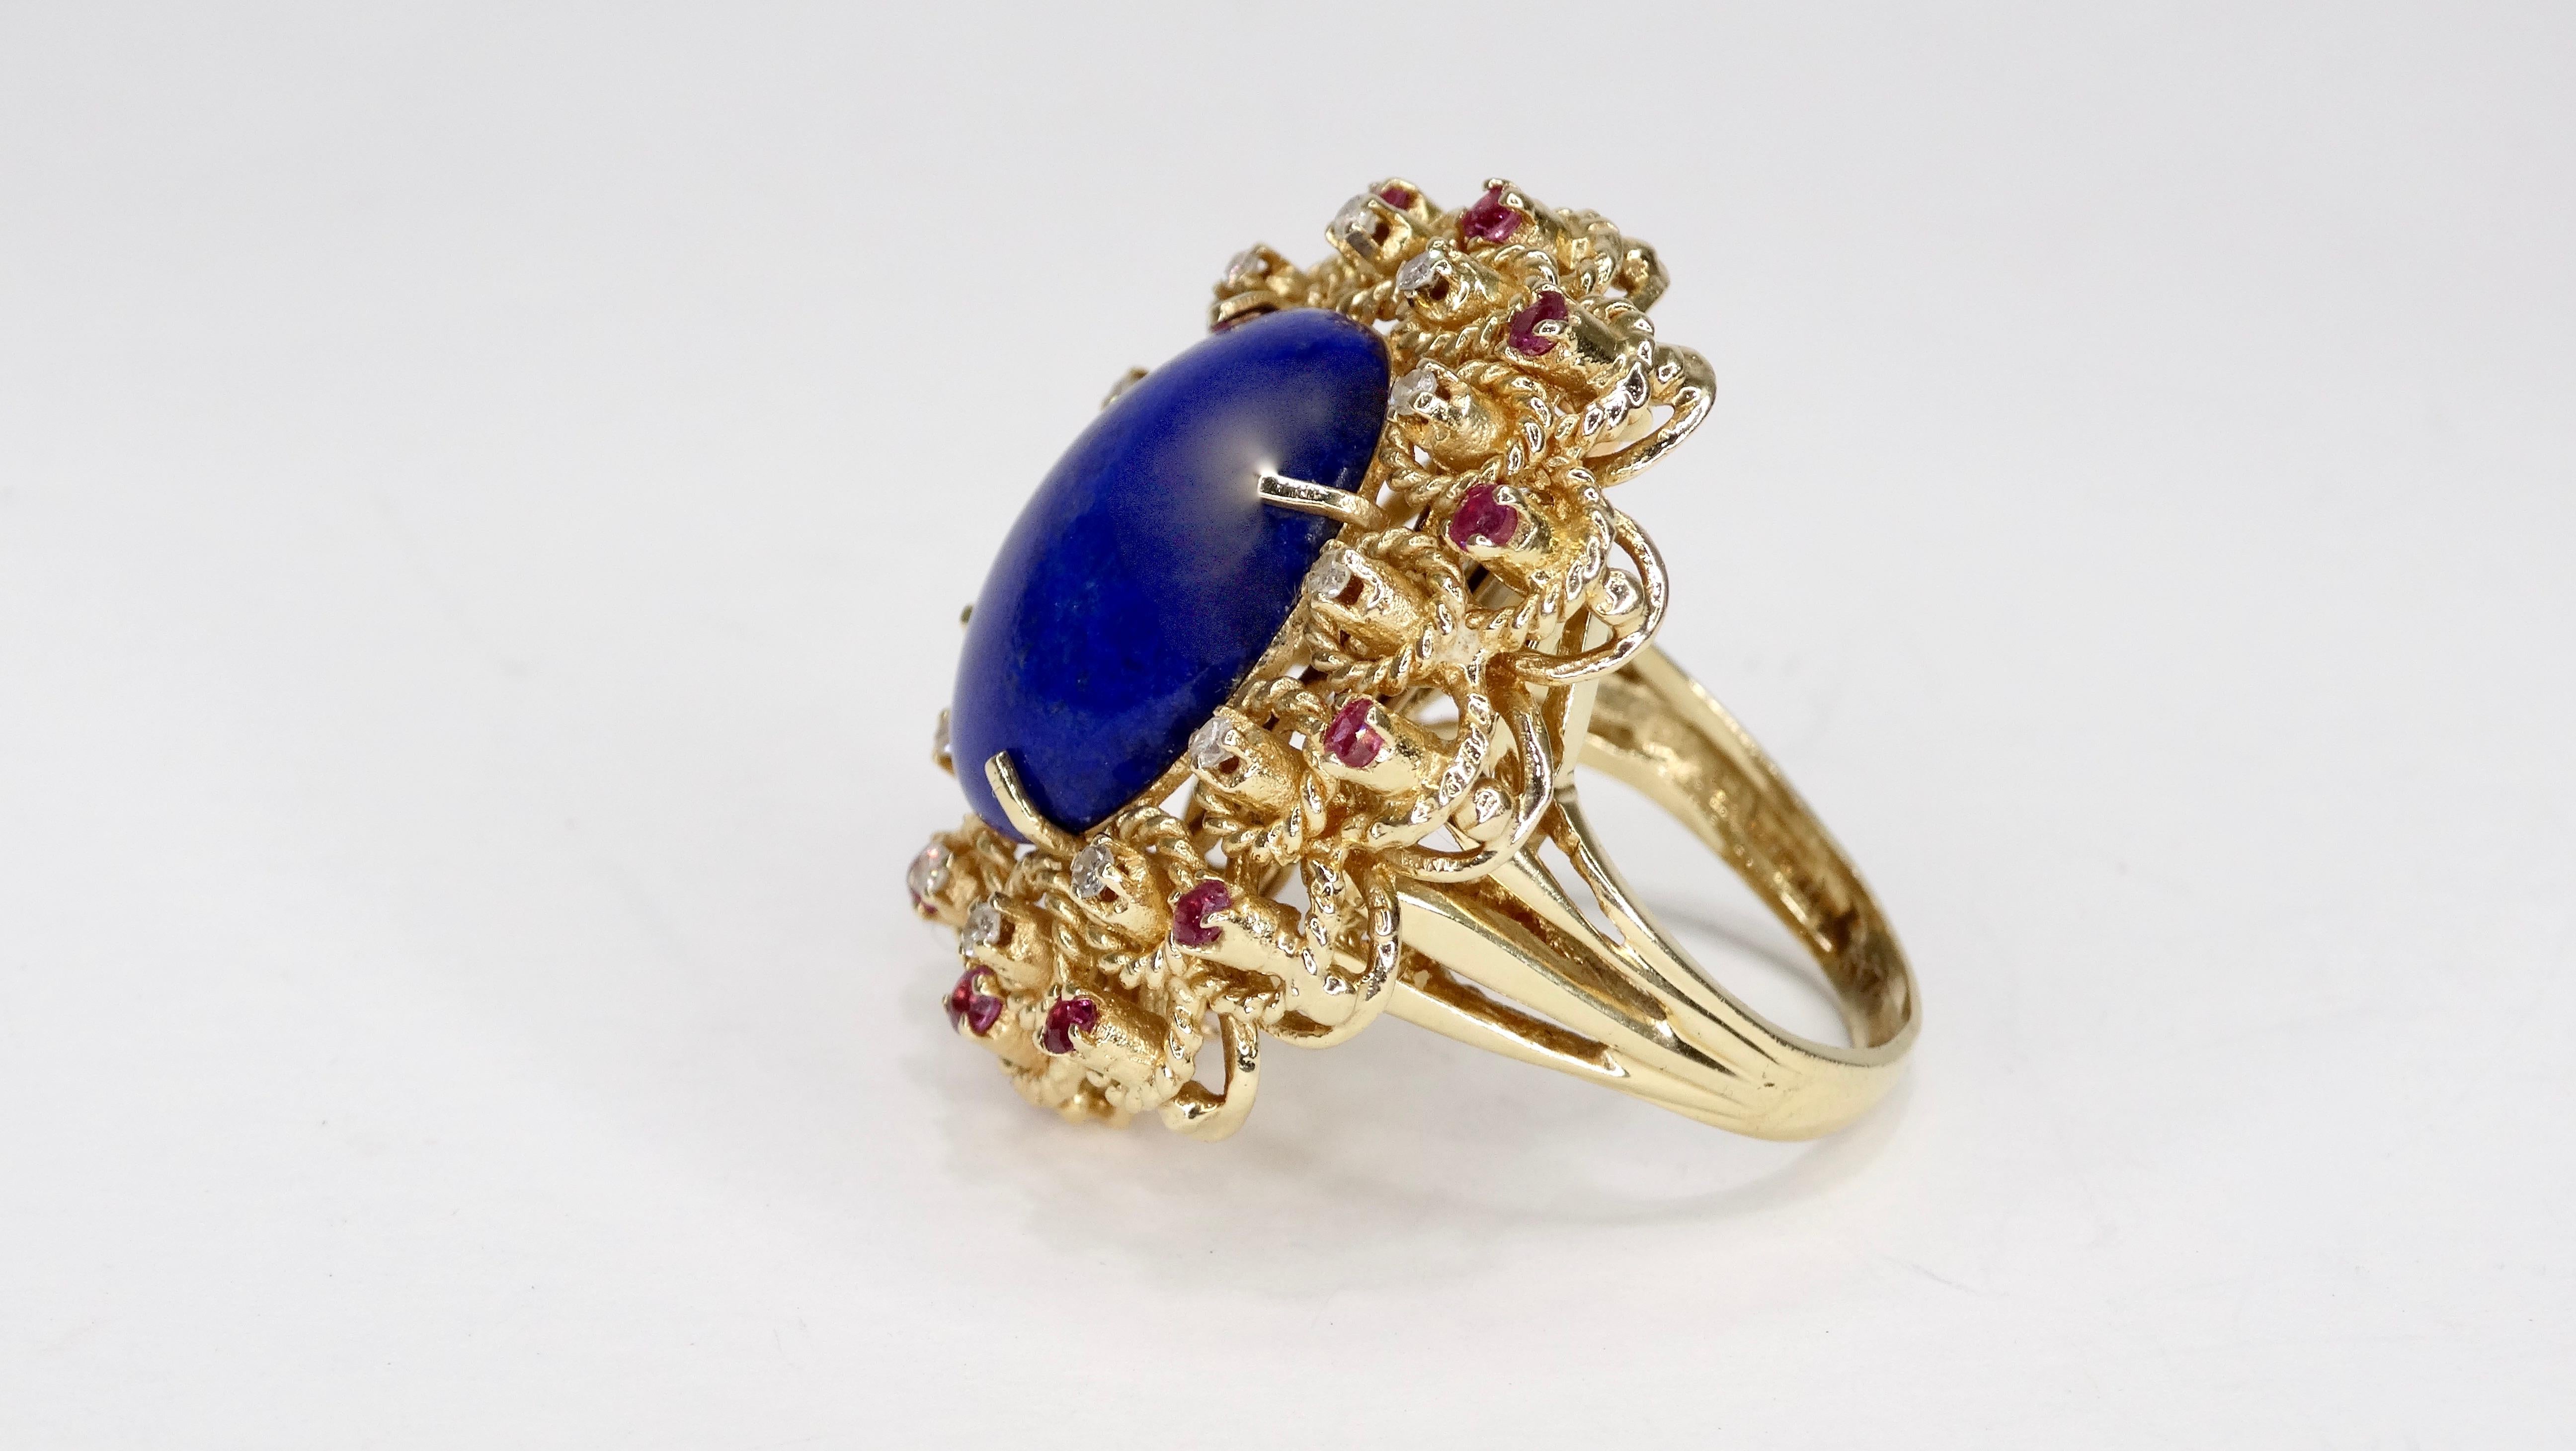 Complete your collection with this beautiful lapis cocktail ring! Circa mid-20th century, this ring is 14k Gold with a large oval lapis stone resting in a center prong setting. Framing the stone are round cut diamond and amethysts set in a